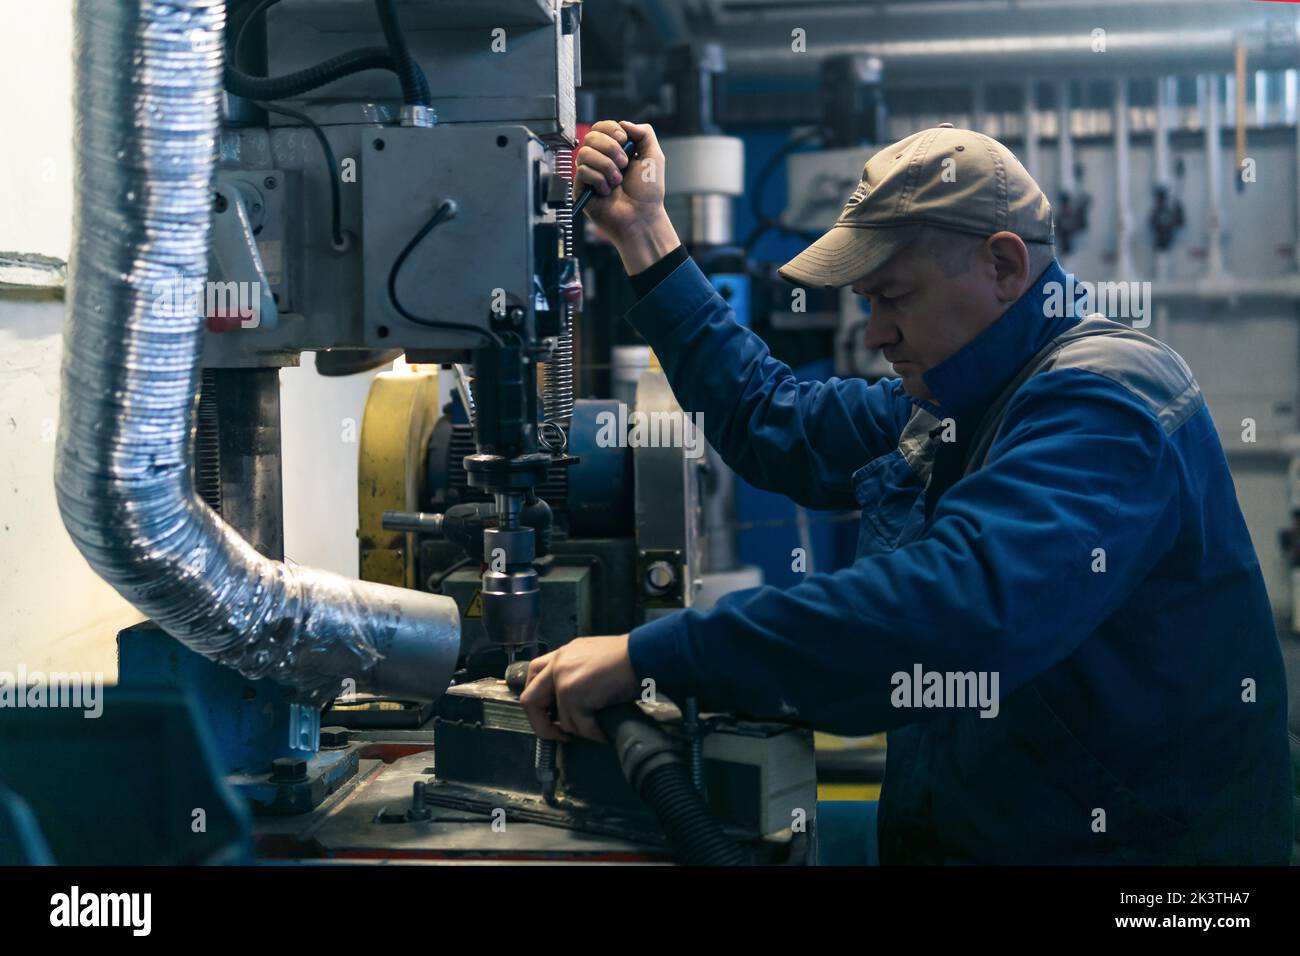 Perm, Russia - September 21, 2022: worker in a semi-dark workshop works on a drilling machine Stock Photo